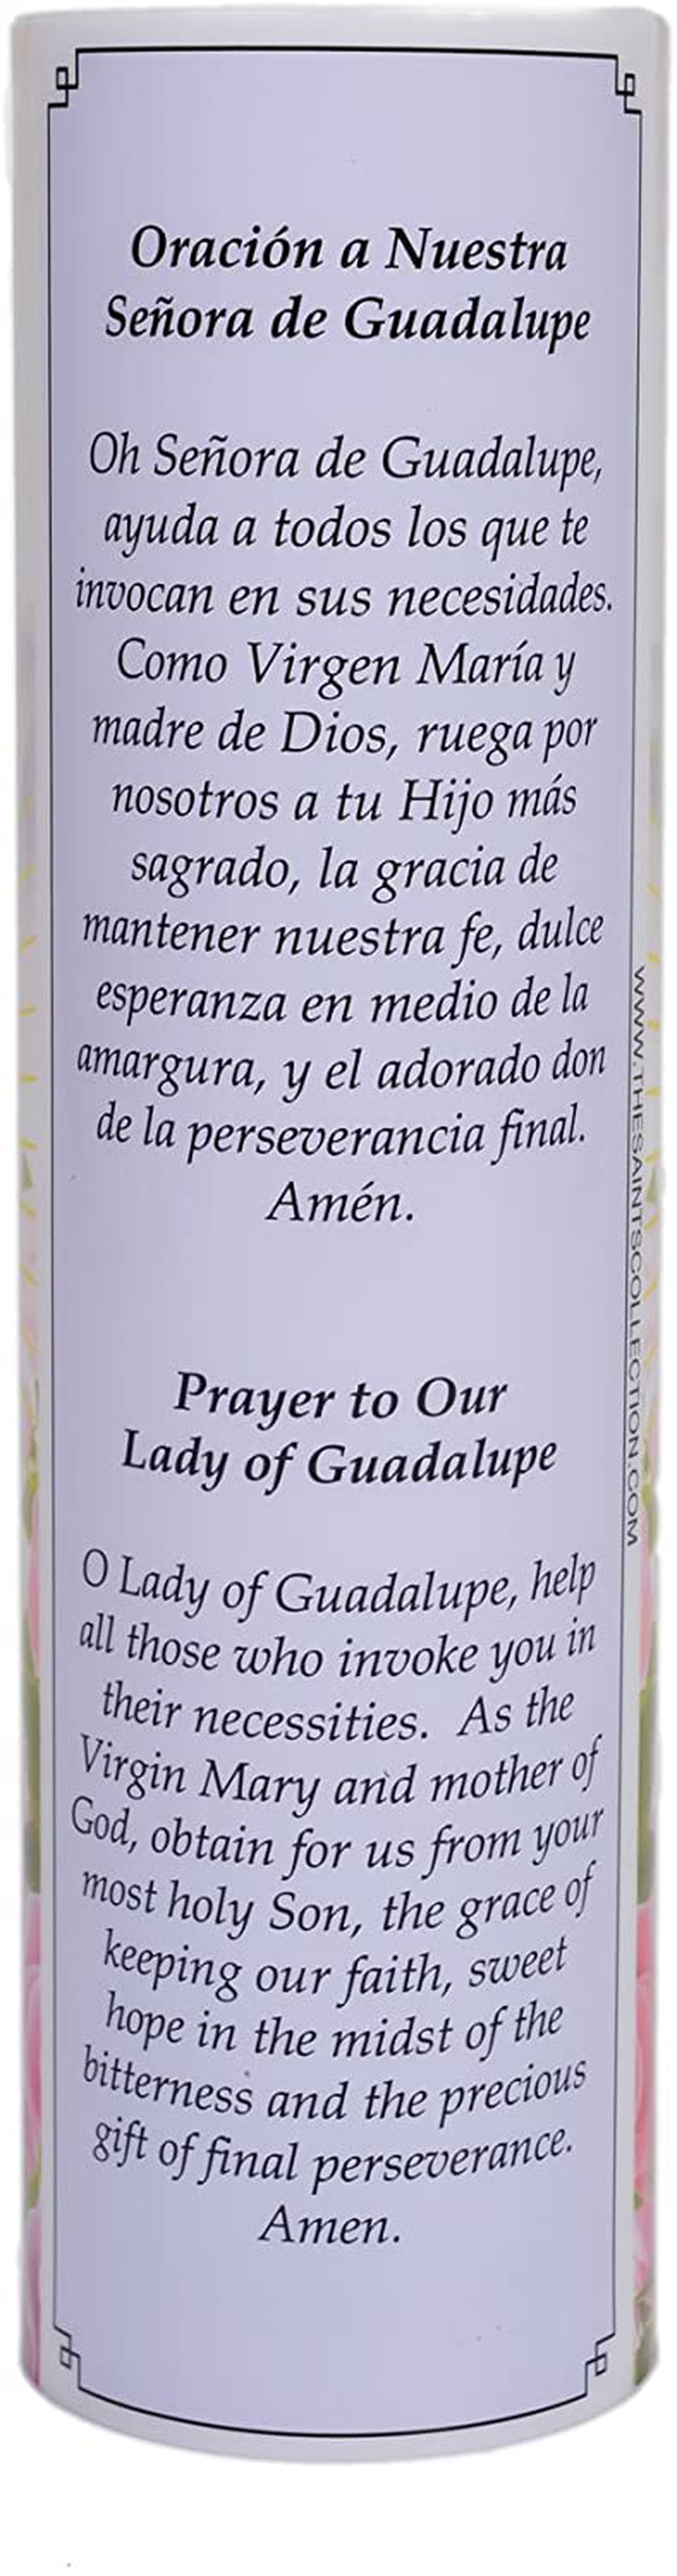 The Virgin of Guadalupe LED Flameless Devotion Prayer Candle, Religious Gift, 6 Hour Timer for More Hours of Enjoyment and Devotion! Dimensions 8.1875" x 2.375"